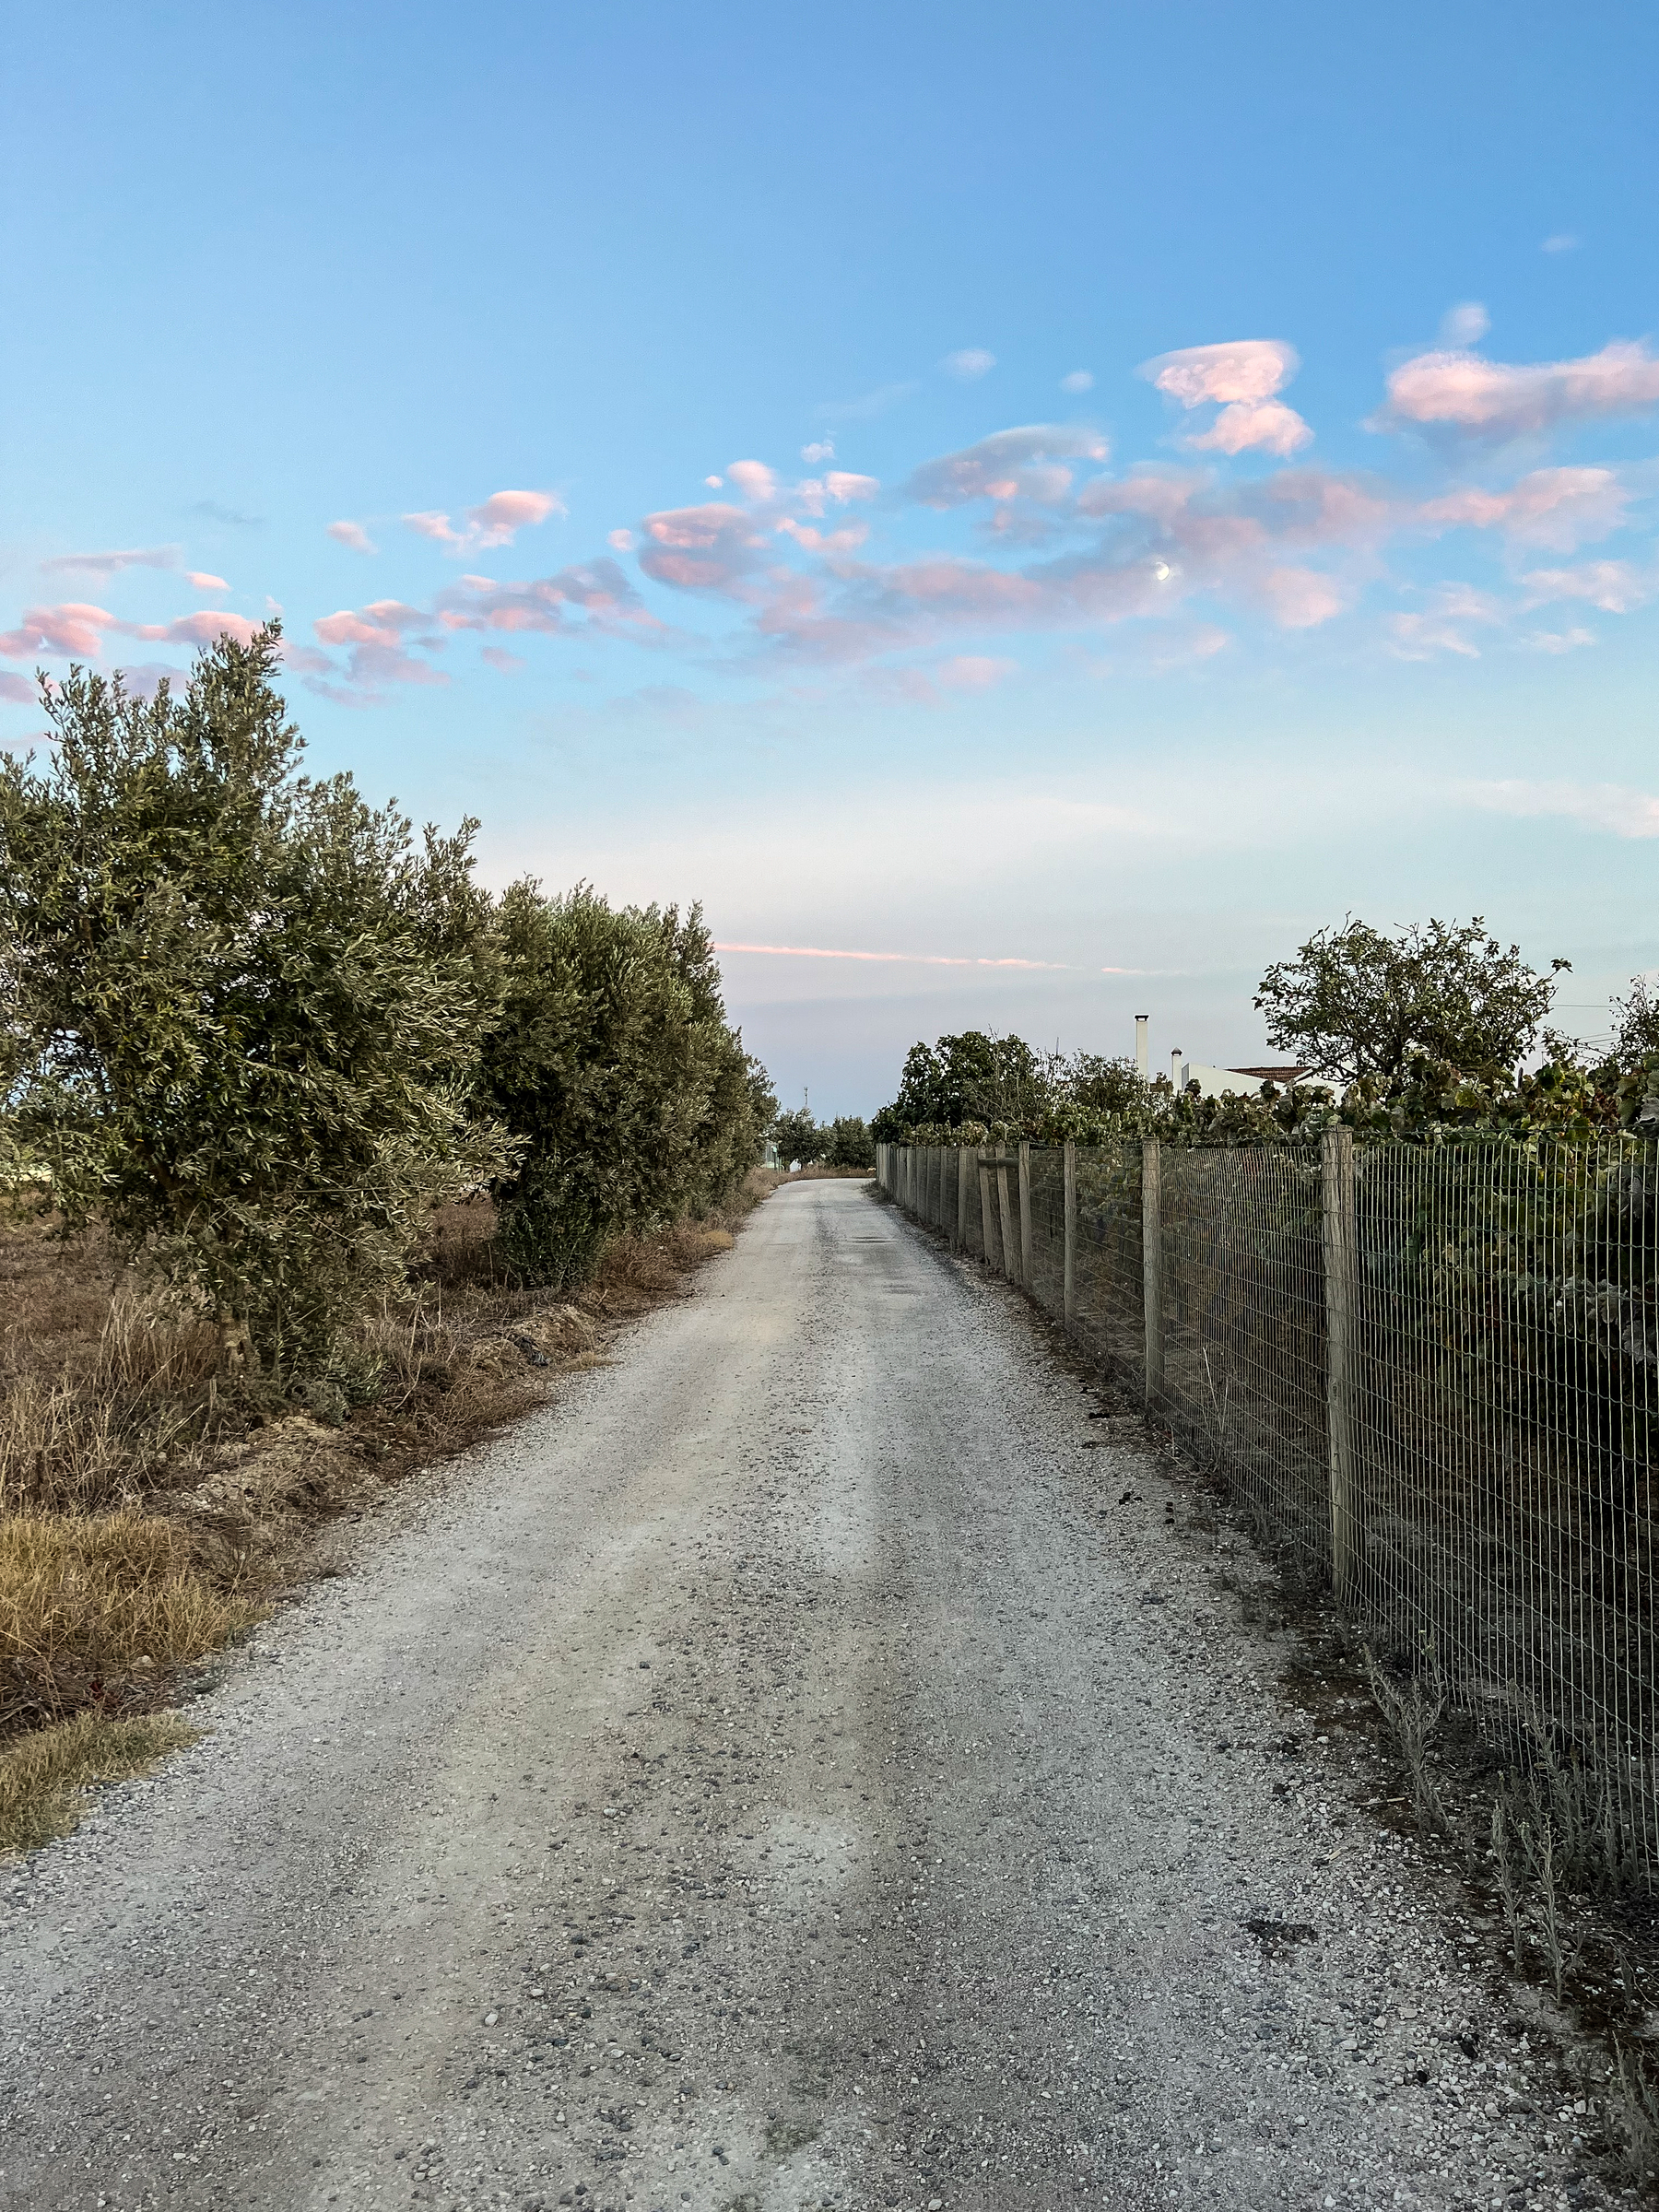 A dirt road. Trees on the left side, a fence on the right one. 